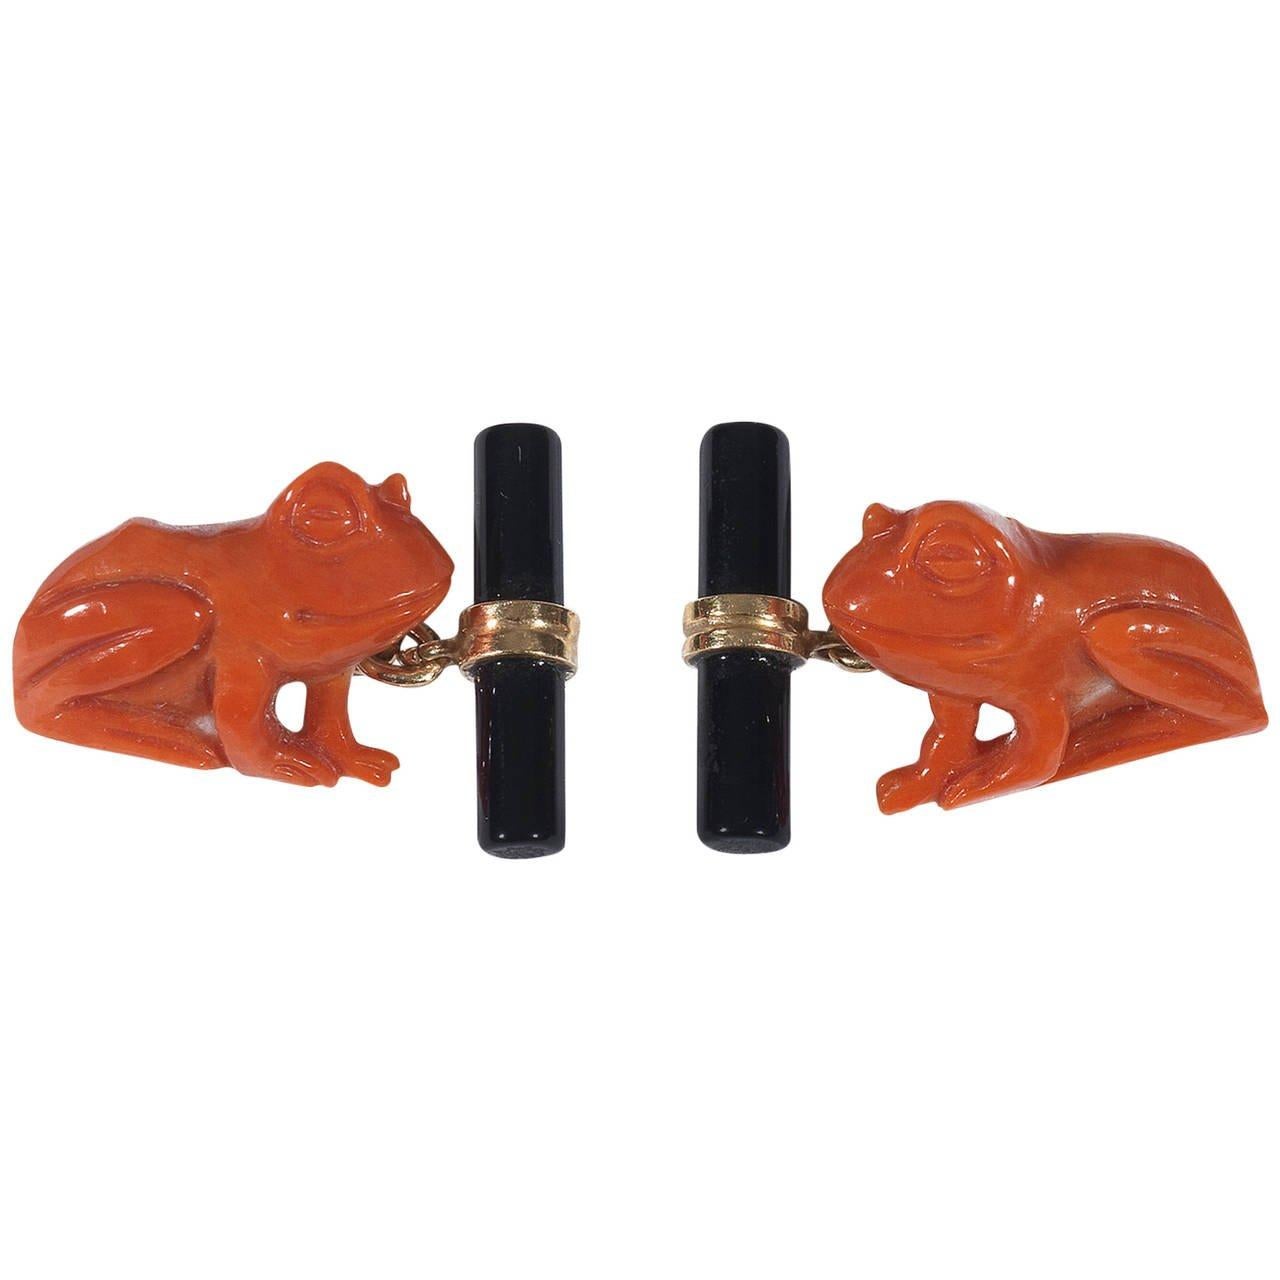 
Pair of cufflinks designed as carved coral frog.

Chain link connections with onyx baton.   

Mounted in 18Kt yellow gold